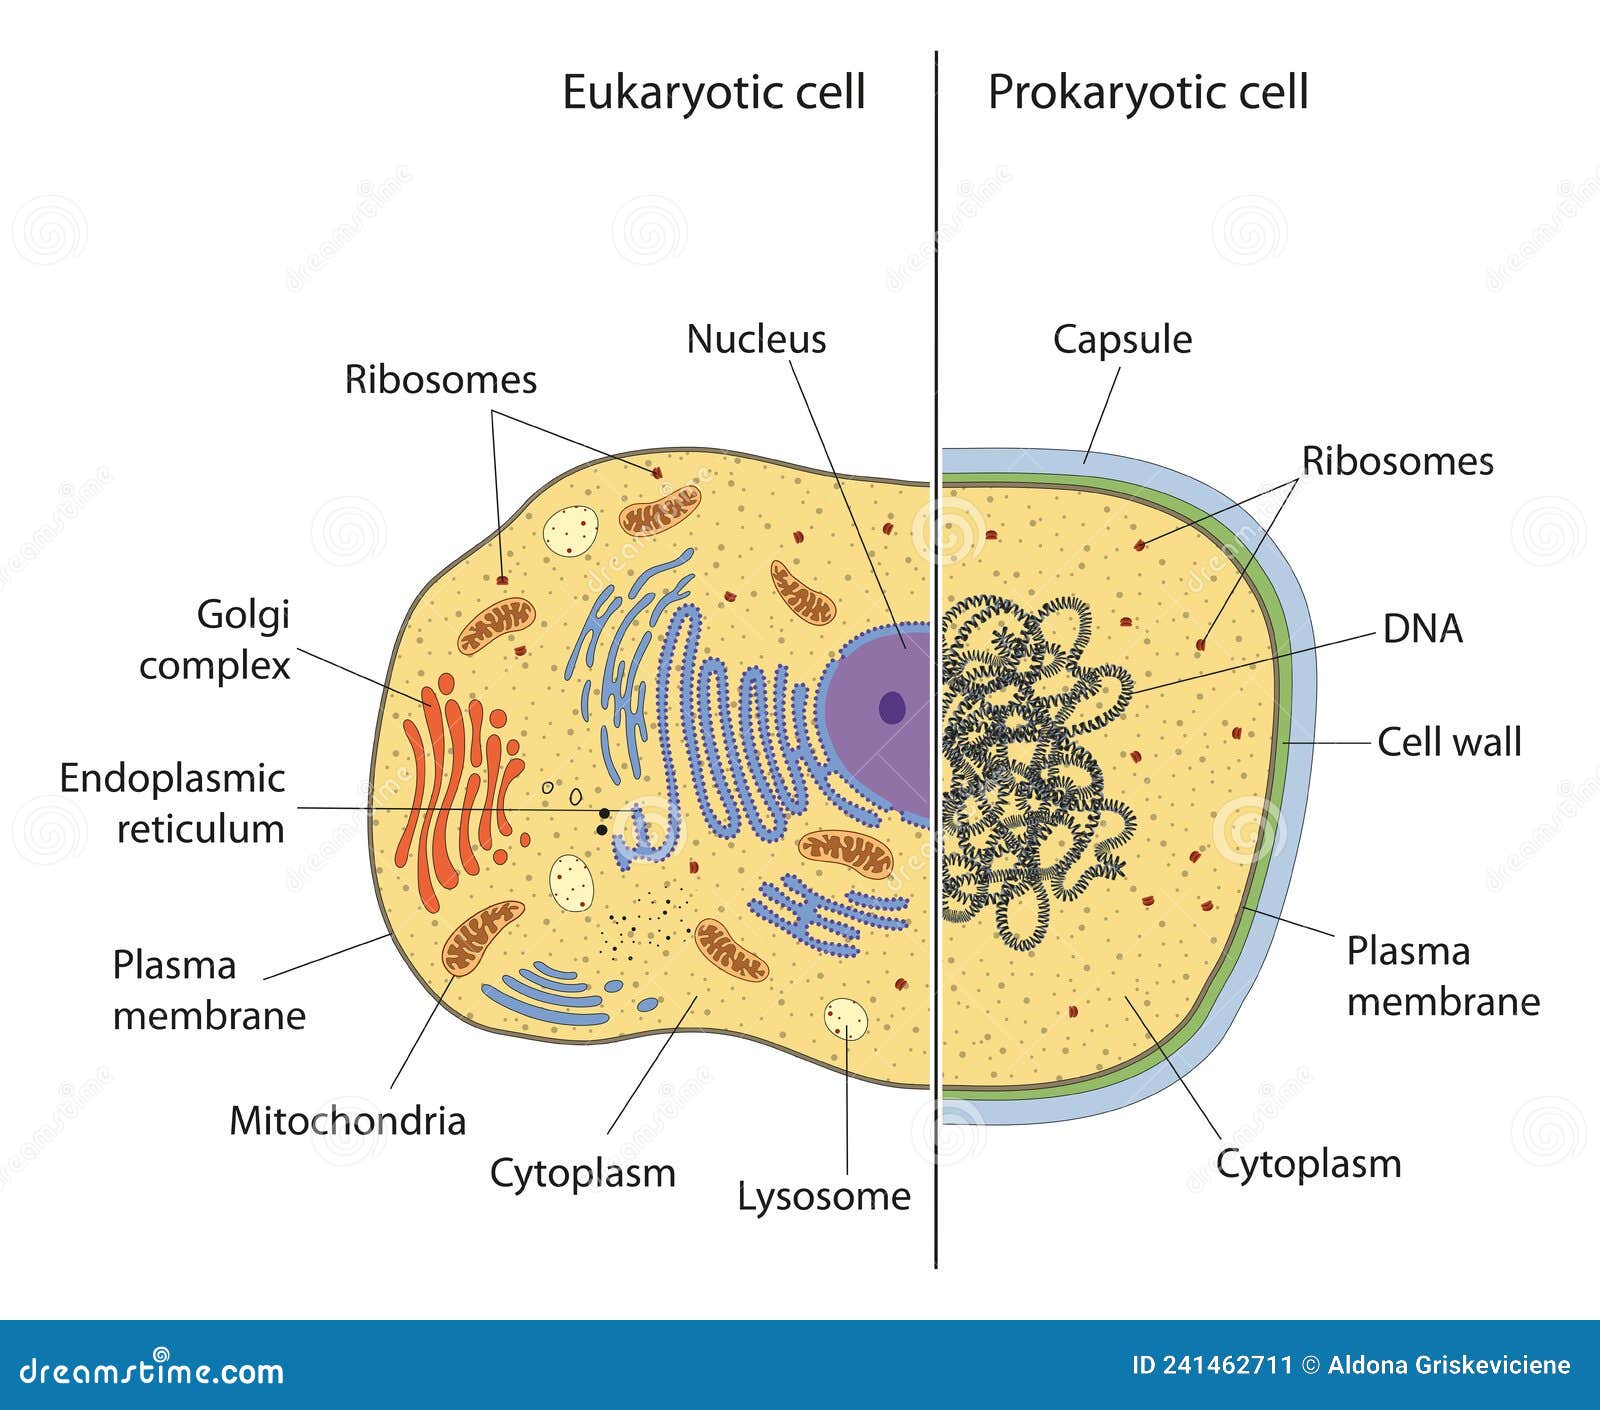 lllustration of eukaryotic and prokaryotic cell with text